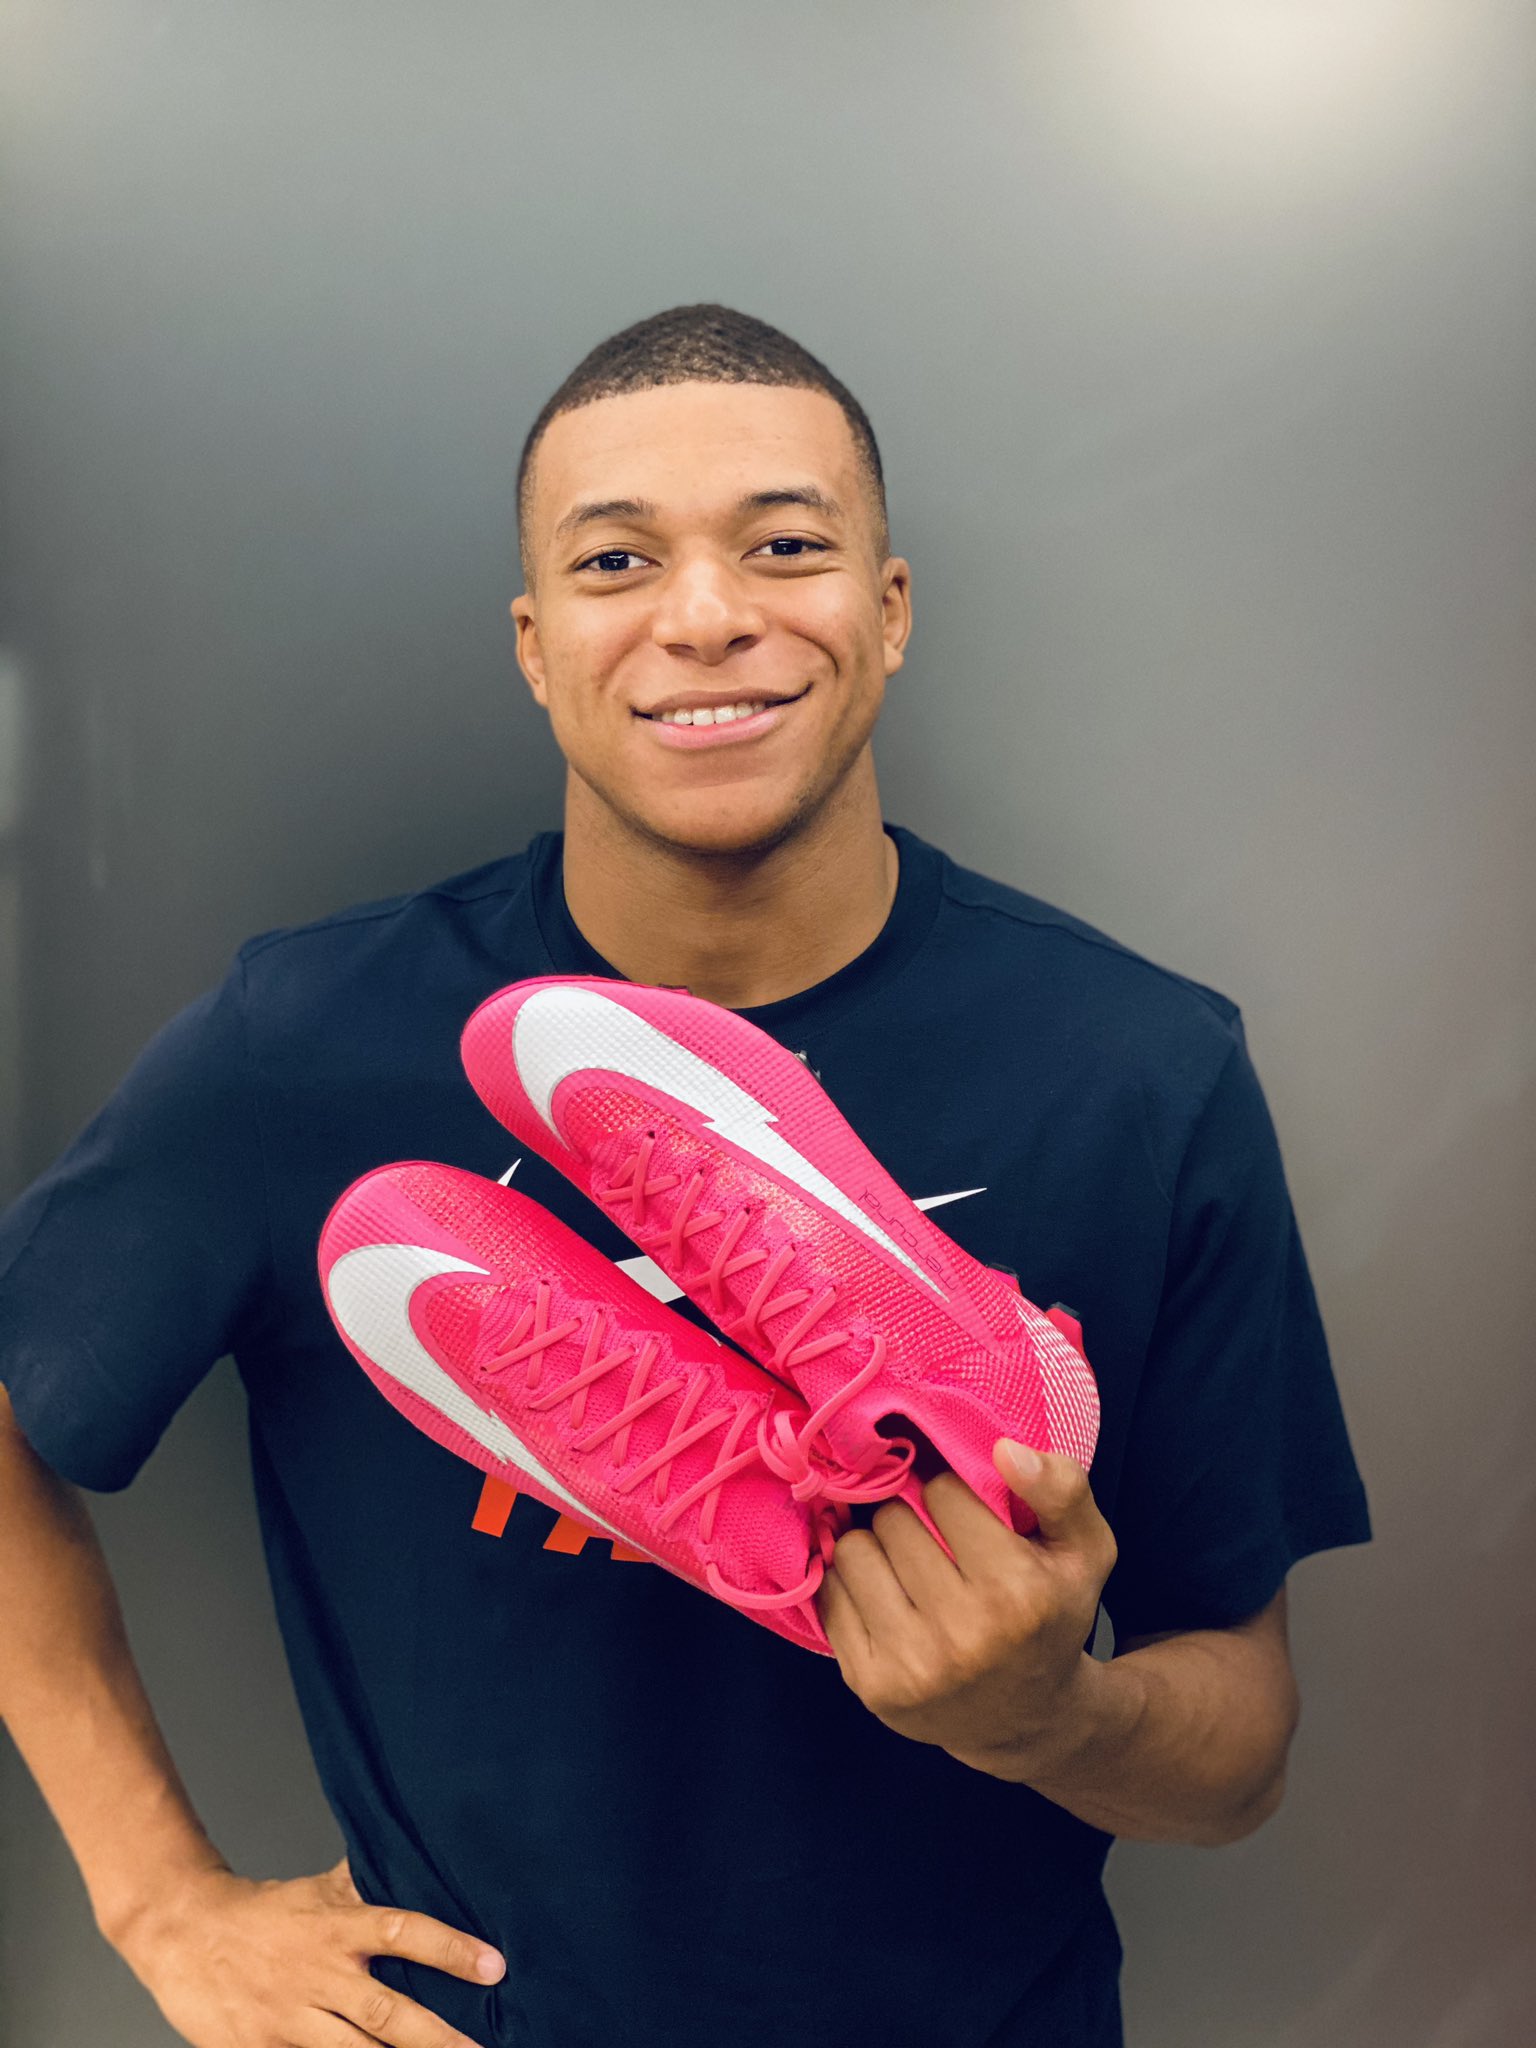 pink mbappe boots